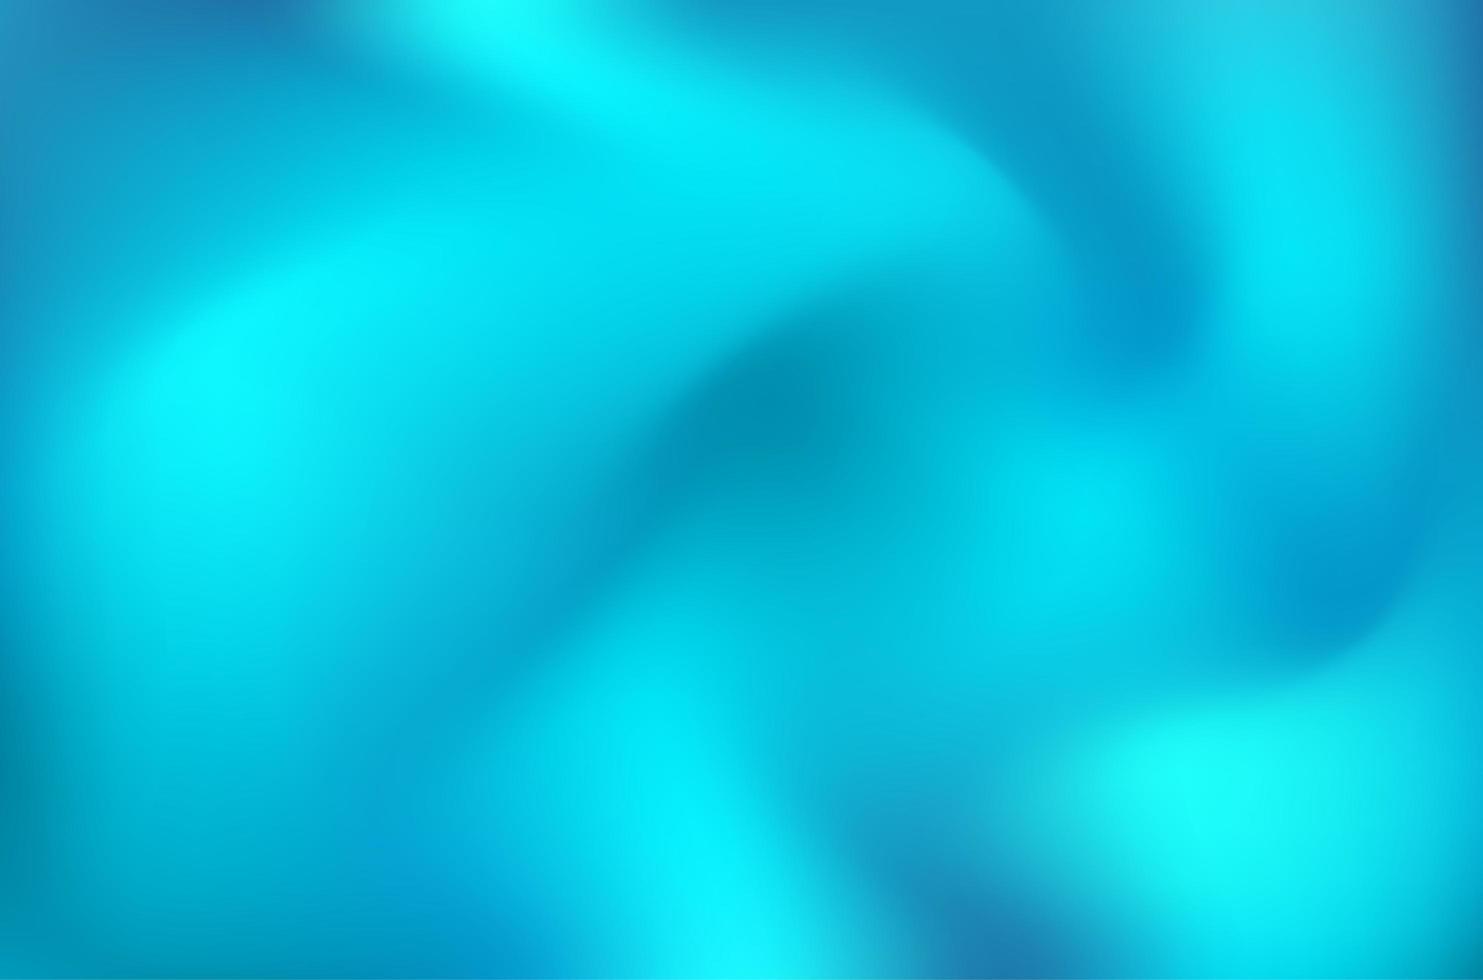 An abstract blue background vector